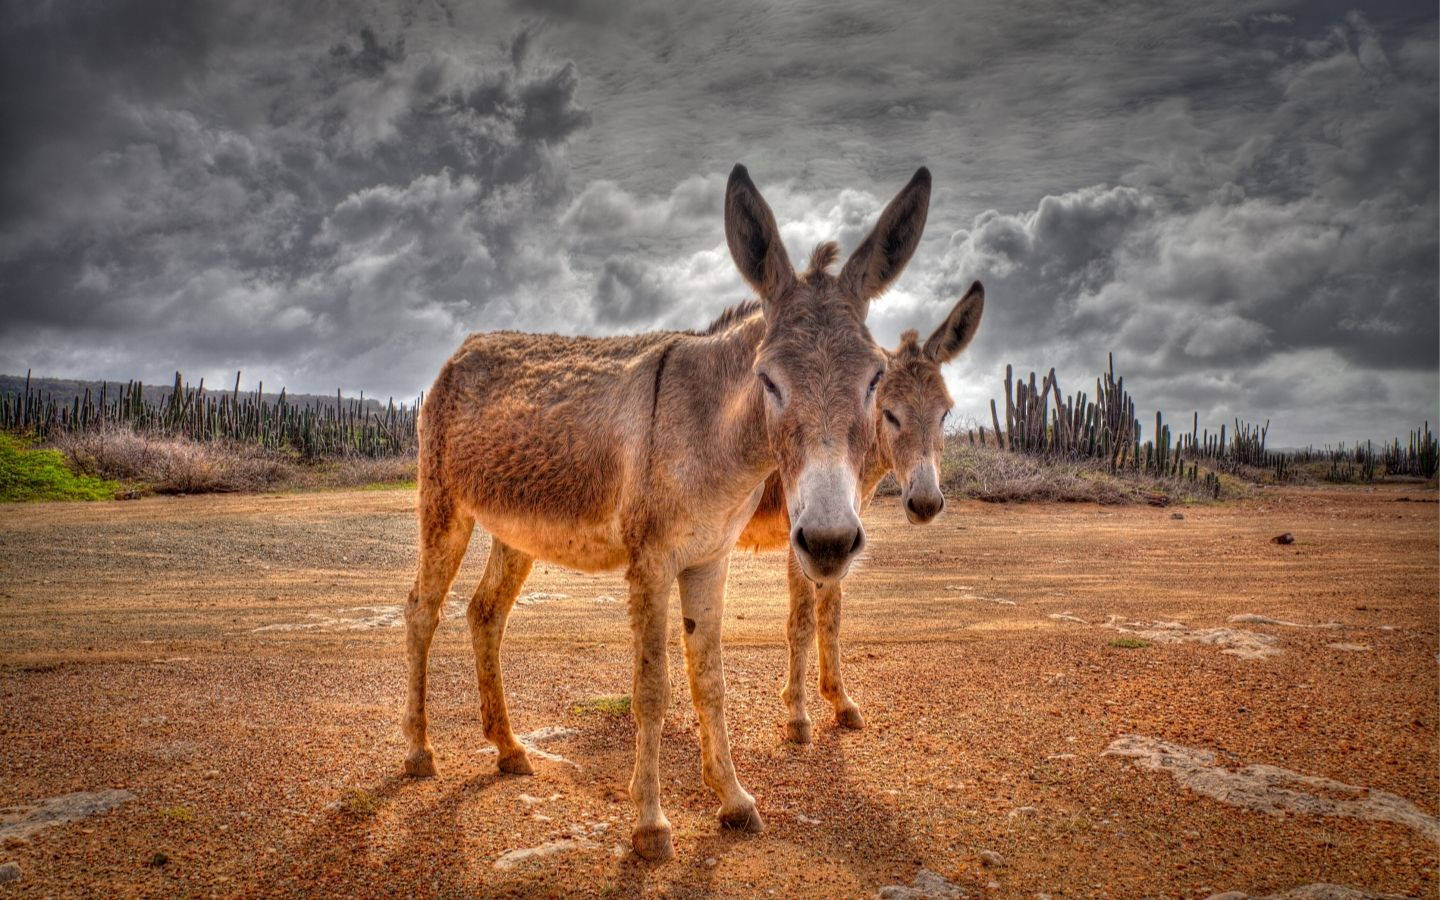 Free Donkey Wallpaper Downloads, [100+] Donkey Wallpapers for FREE |  